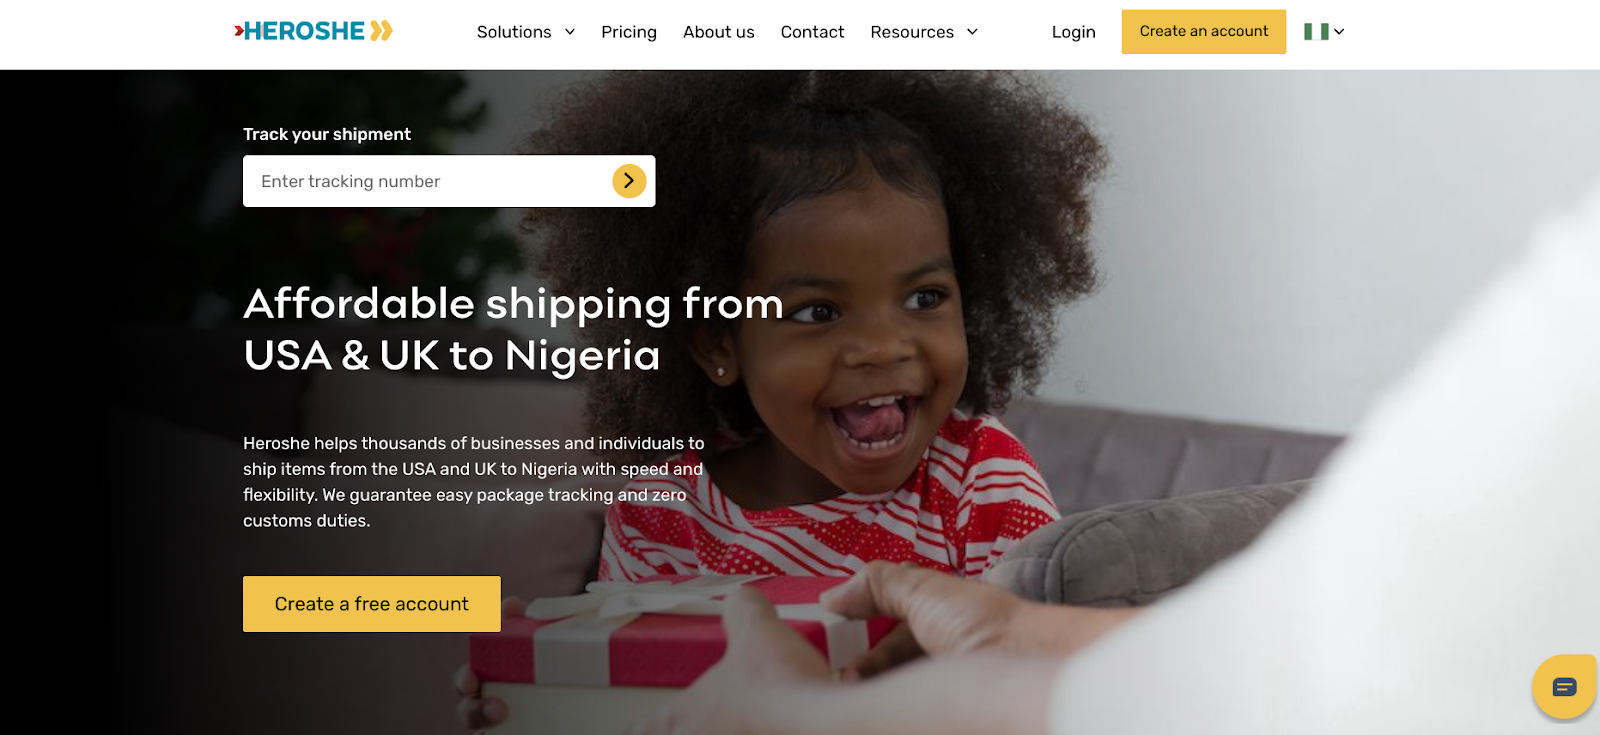 Affordable shipping from the USA & UK to Nigeria